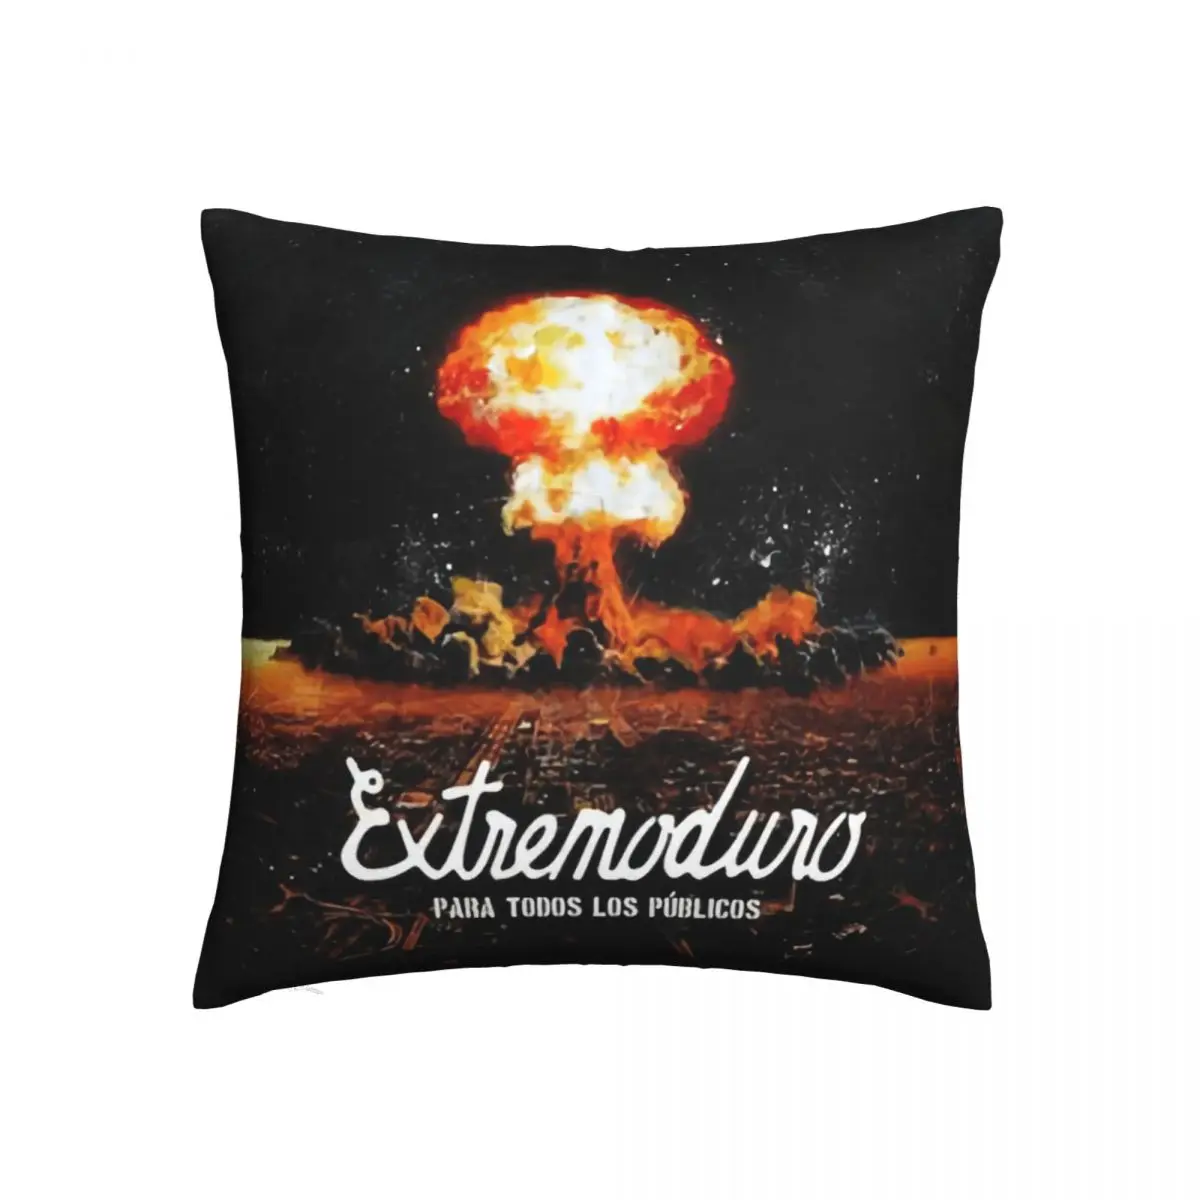 

Square Pillow Extremoduro, Nuevas Entradas Graphic Cool R251 Weeping Willow Square Pillow Print Funny Joke Support